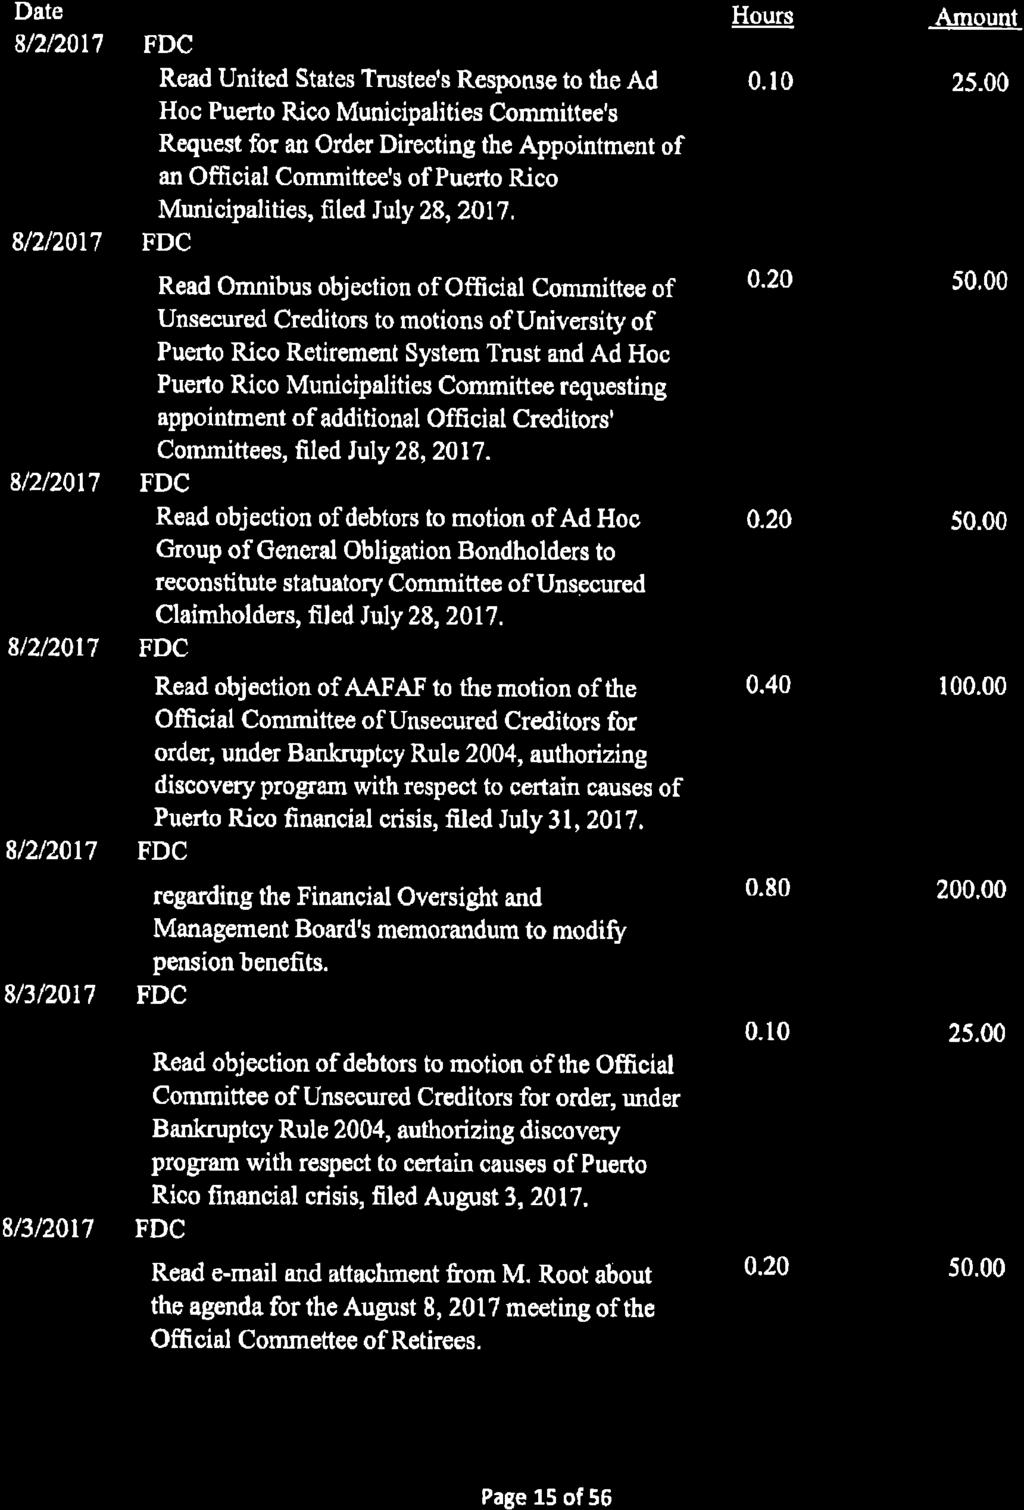 Exhibit C- Detailed Time Records Page 28 of 112 Date 8/2/2017 8/2/2017 8/2/2017 8/2/2017 8/2/2017 8/3/2017 8/3/2017 Attorney / Activity FDC Read United States Trustee's Response to the Ad Hoc Puerto